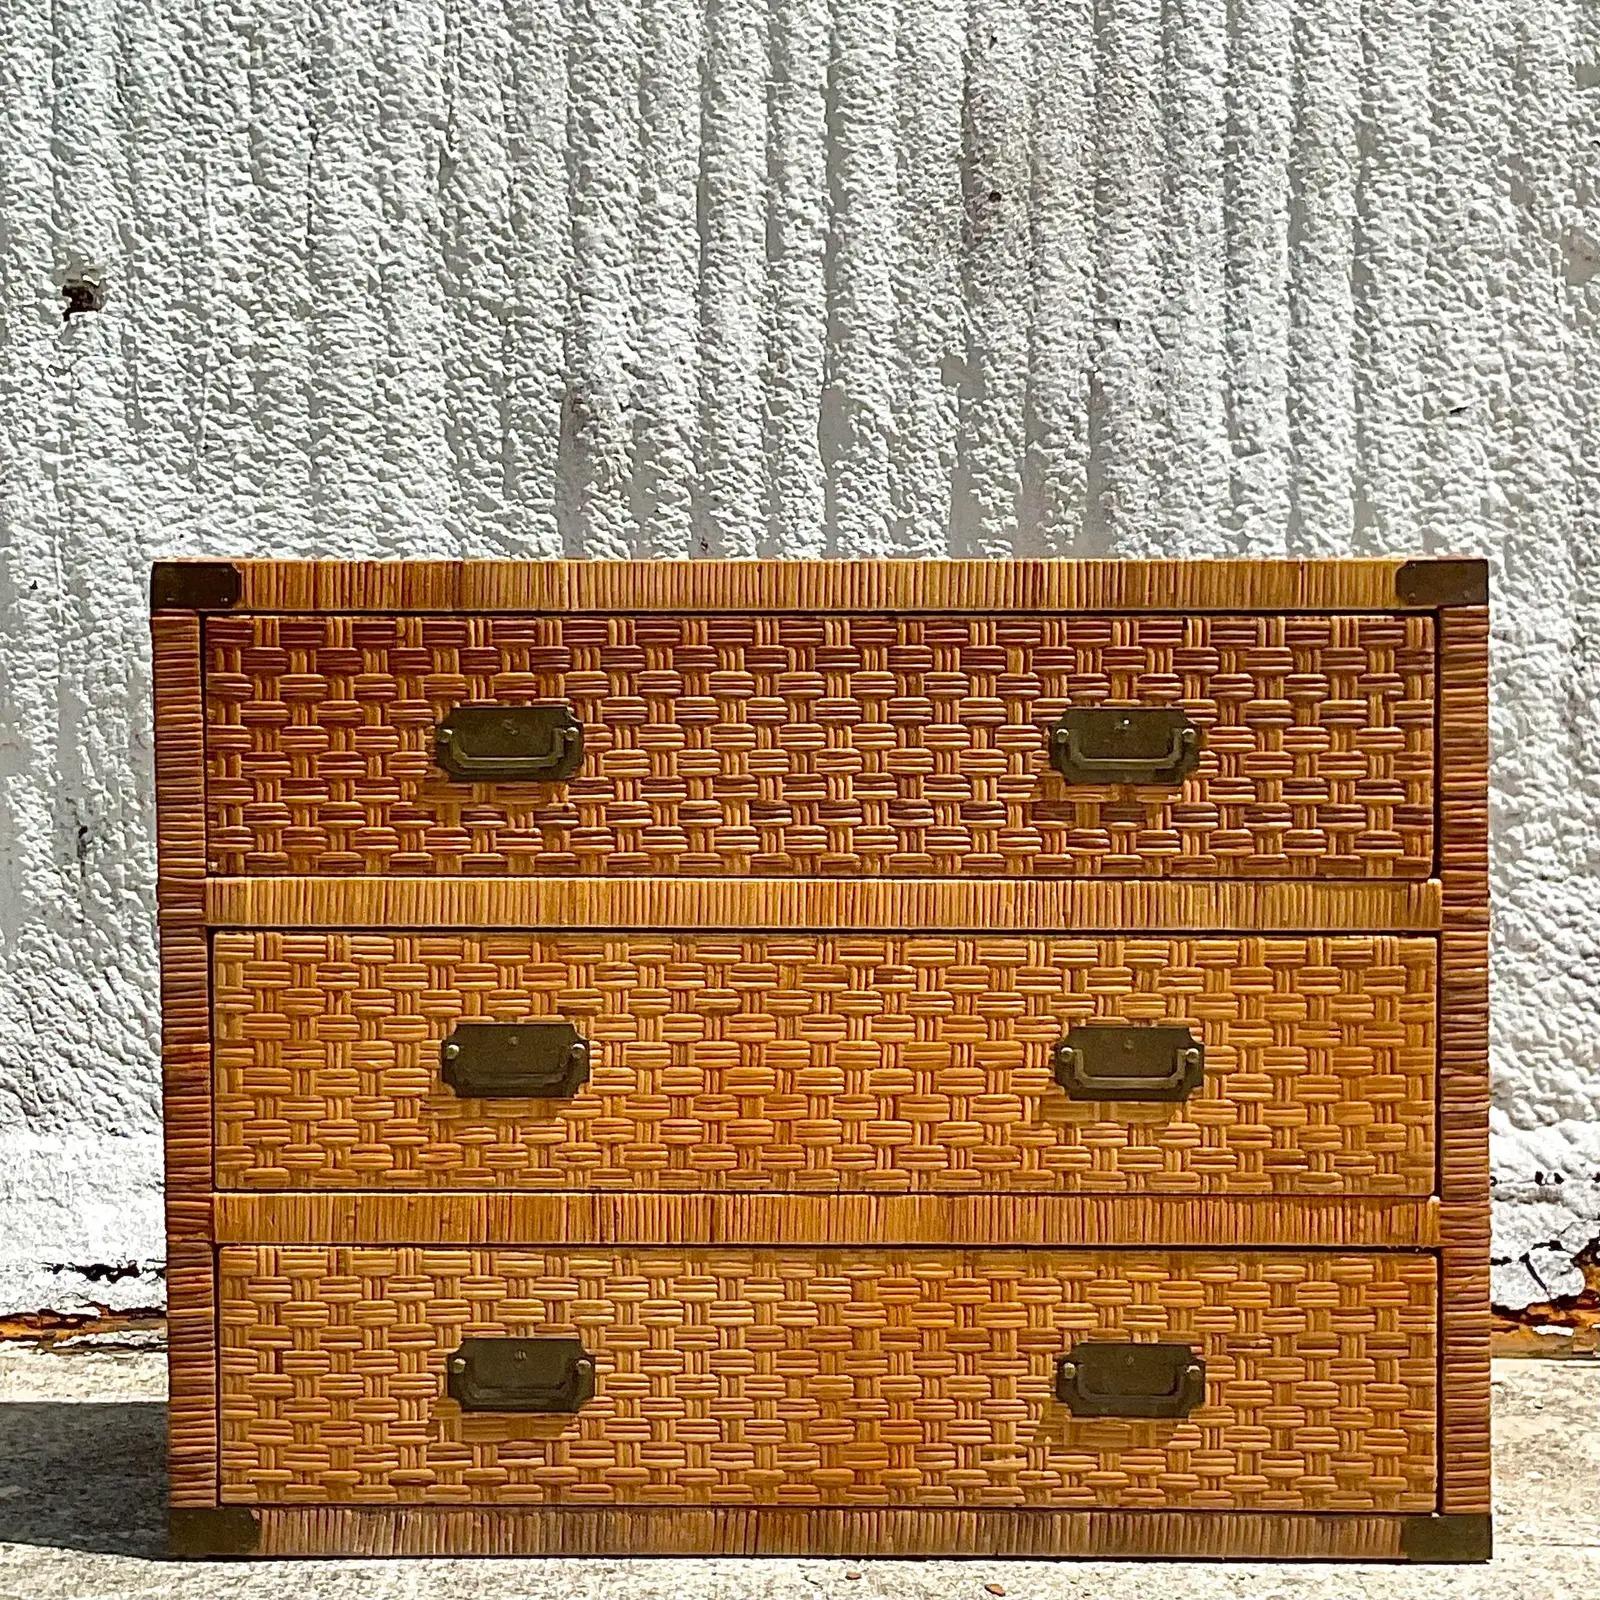 Philippine Late 20th Century Vintage Coastal Woven Rattan Chest of Drawers